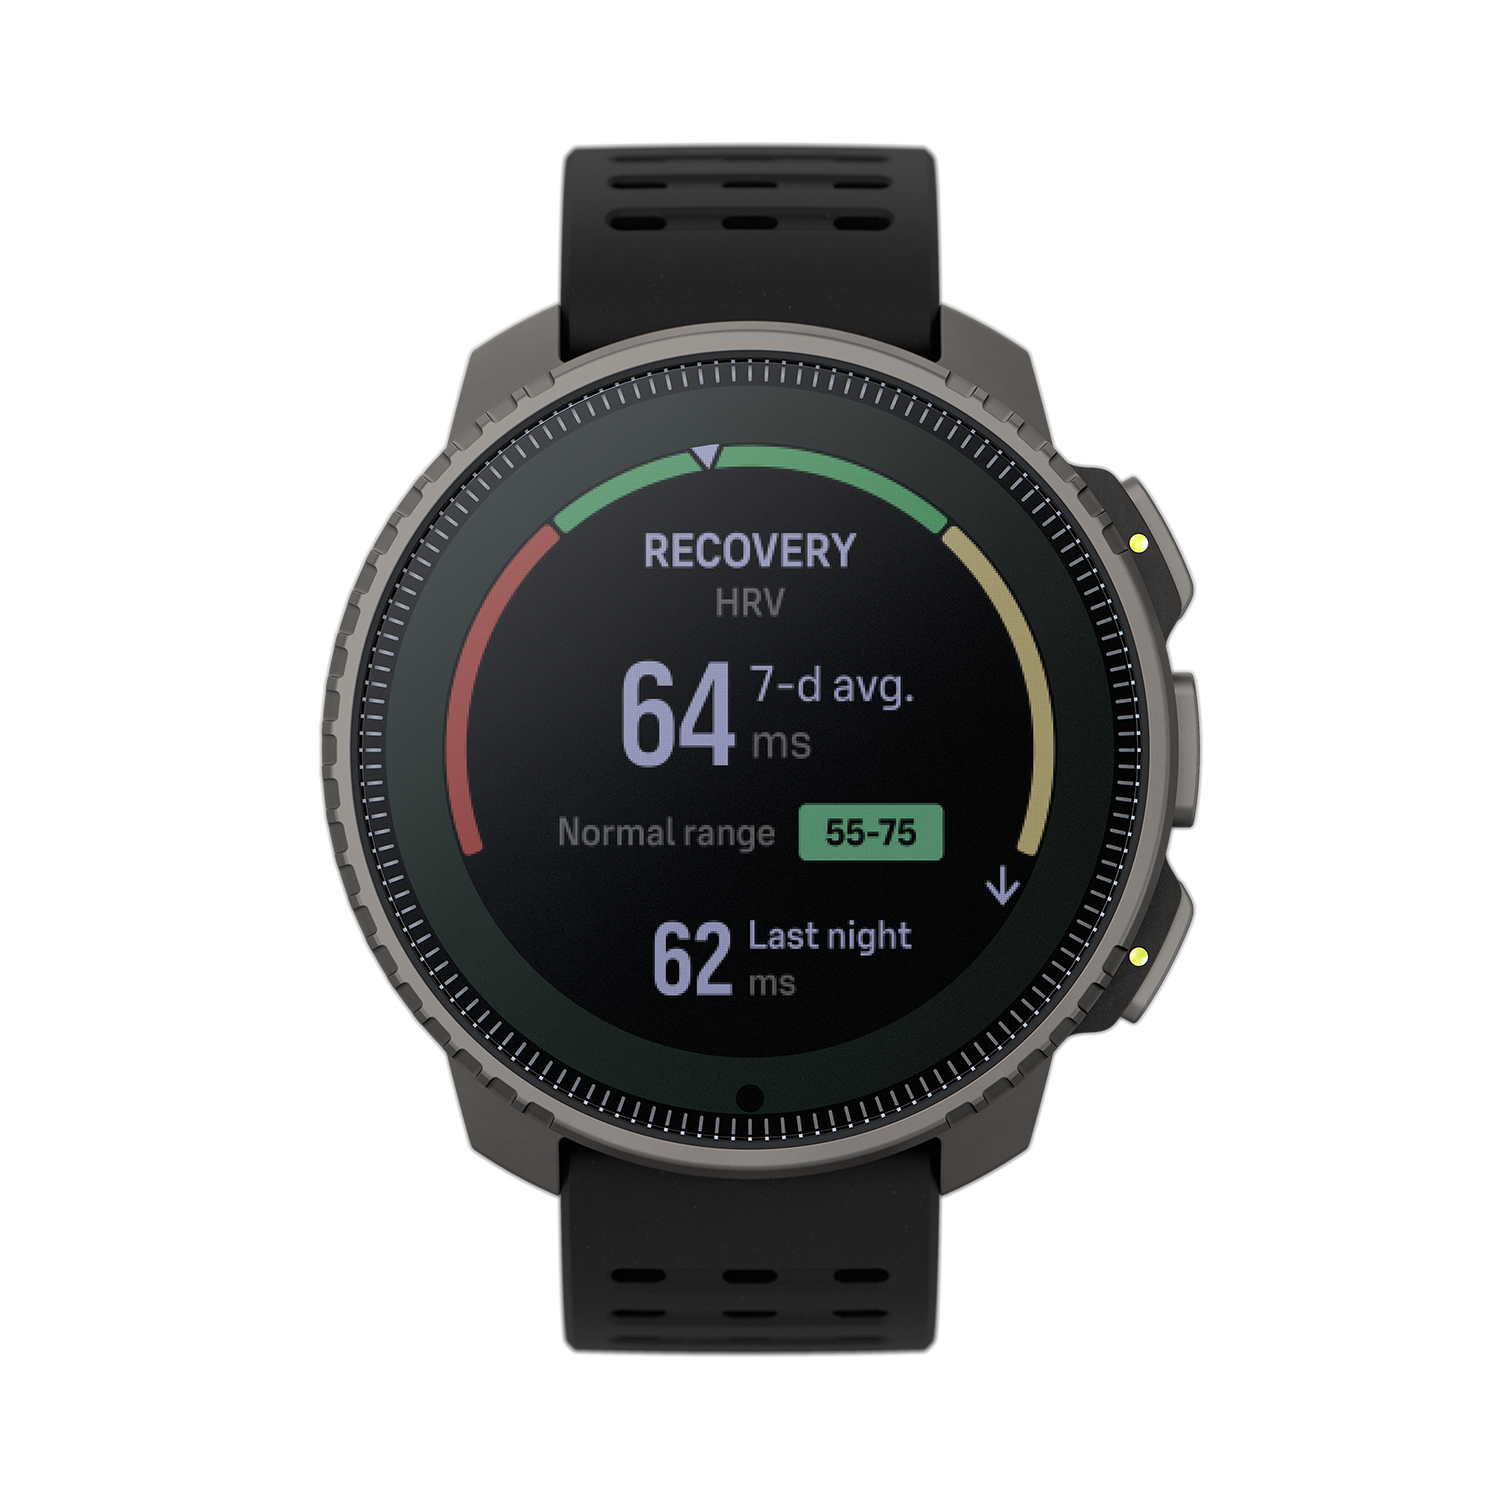 Measure Heart rate variability (HRV) to optimize your recovery.